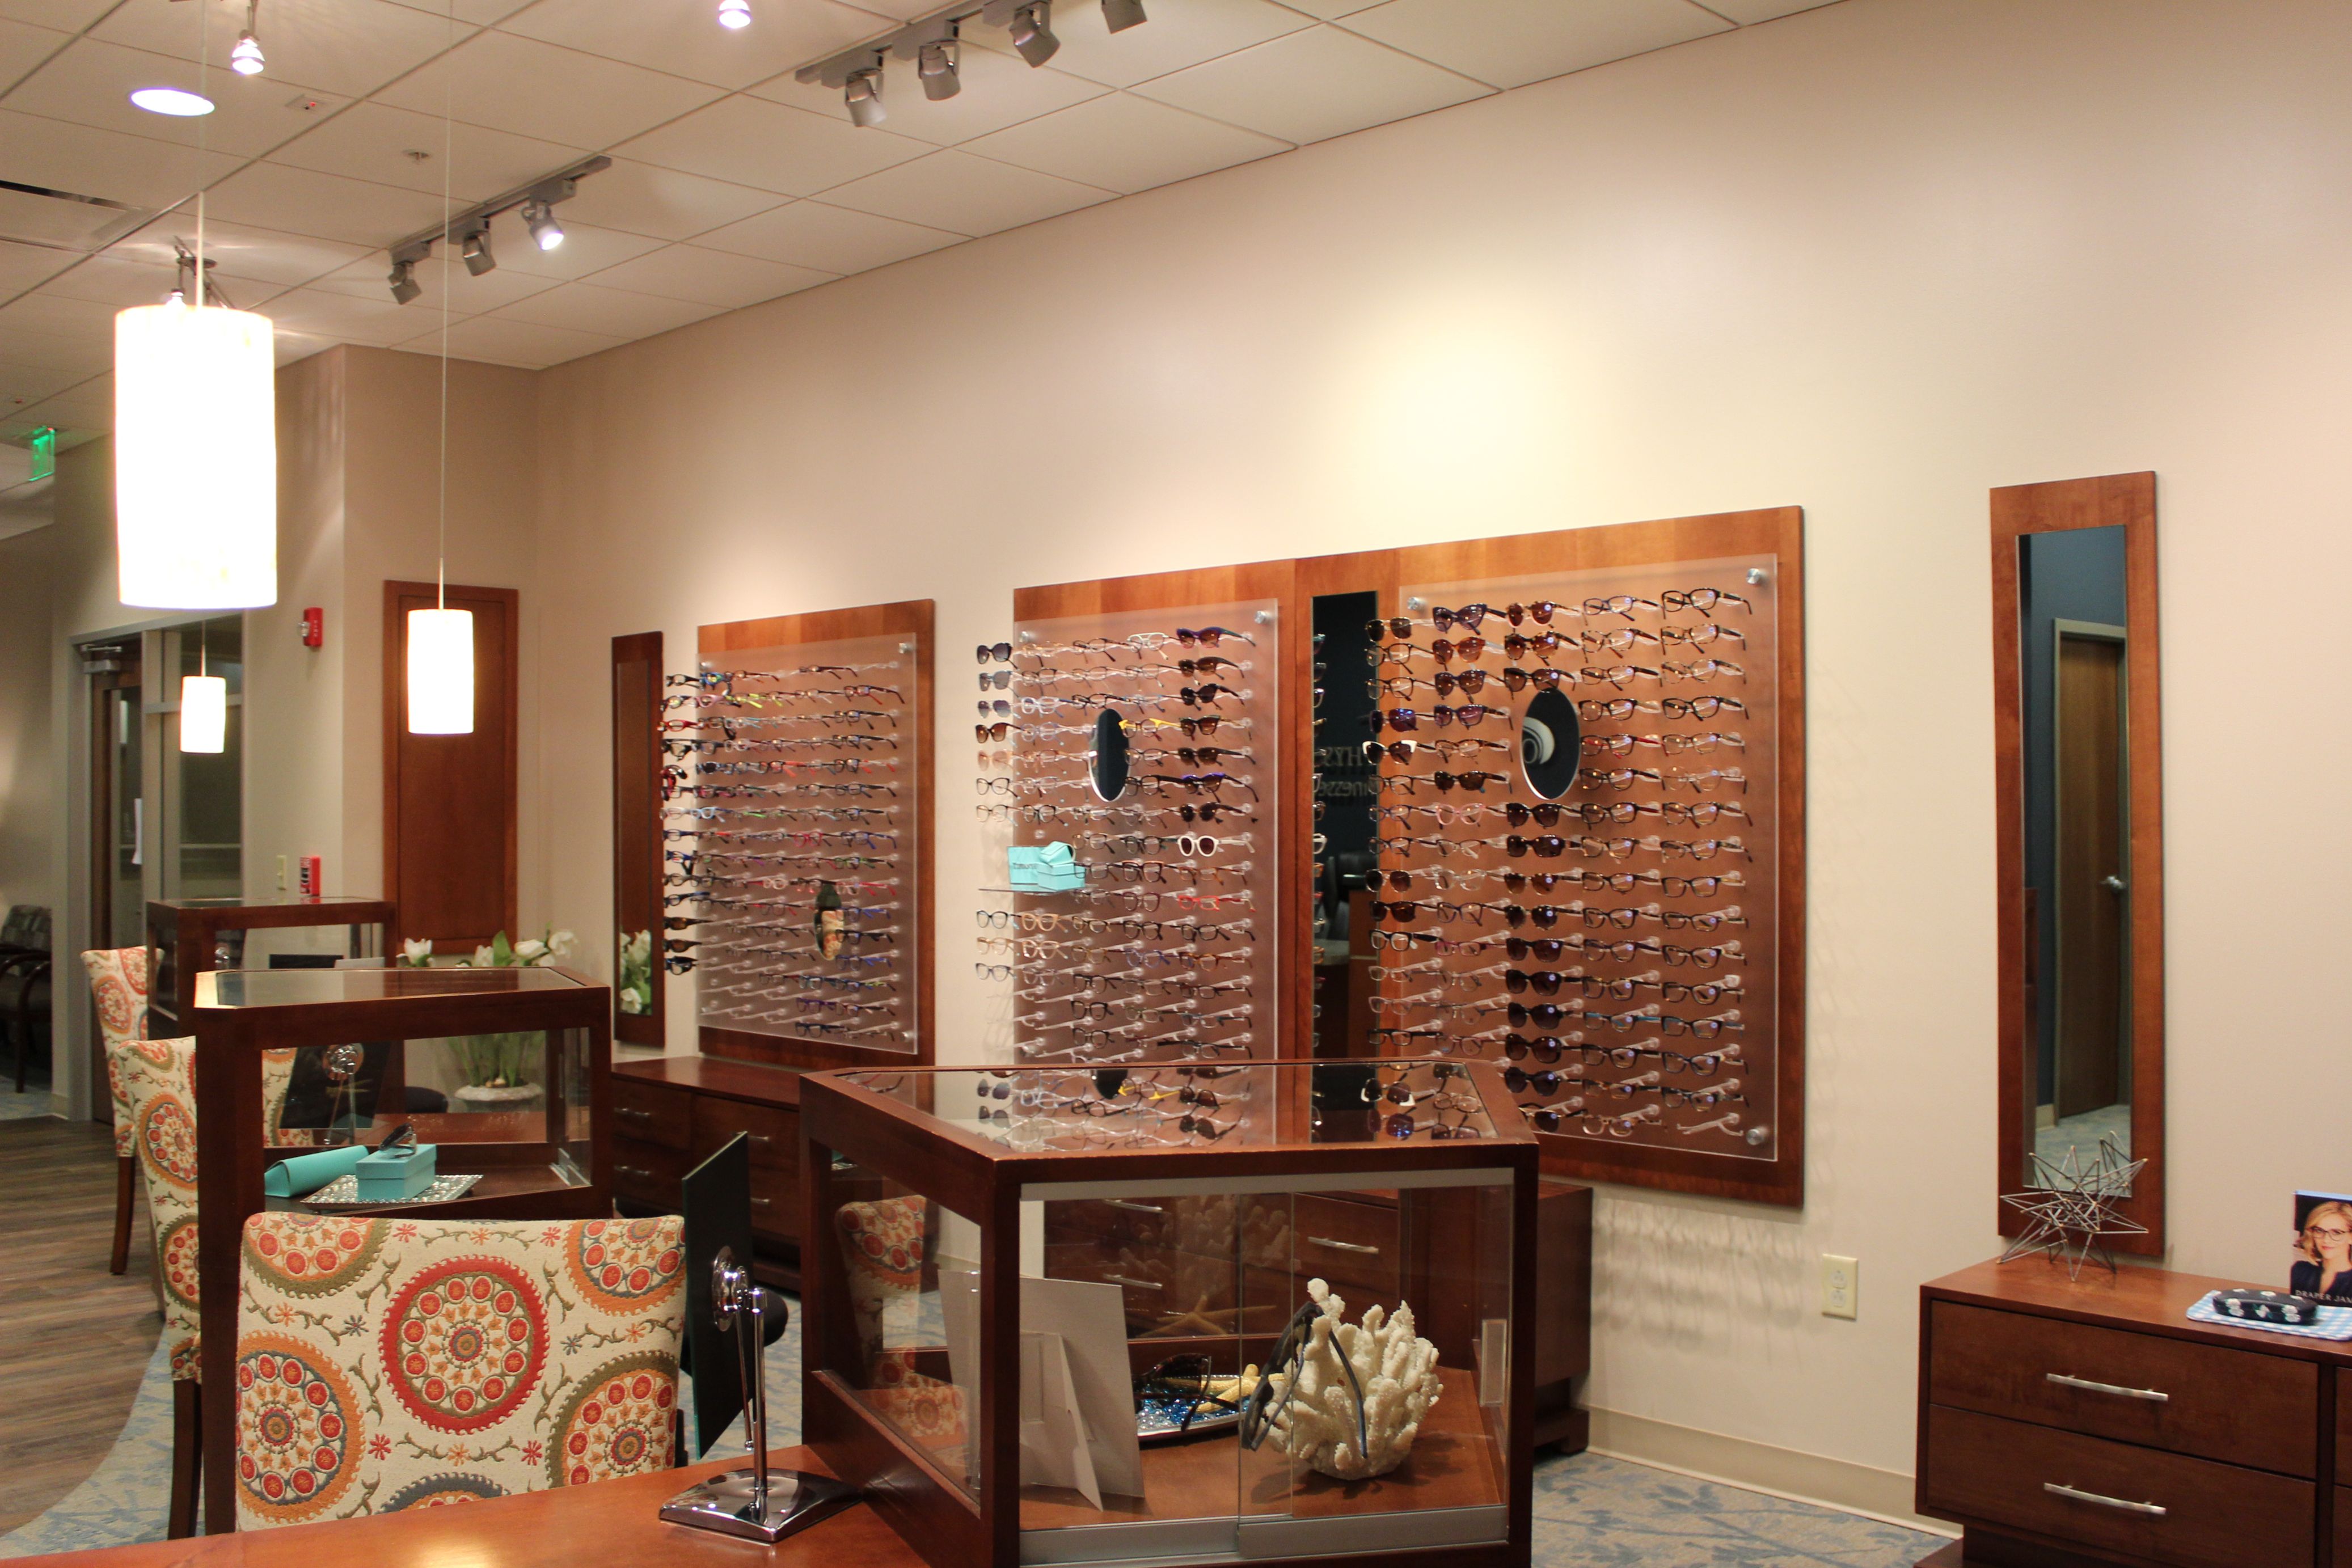 Optometric Physicians of Middle Tennessee - Nashville Photo